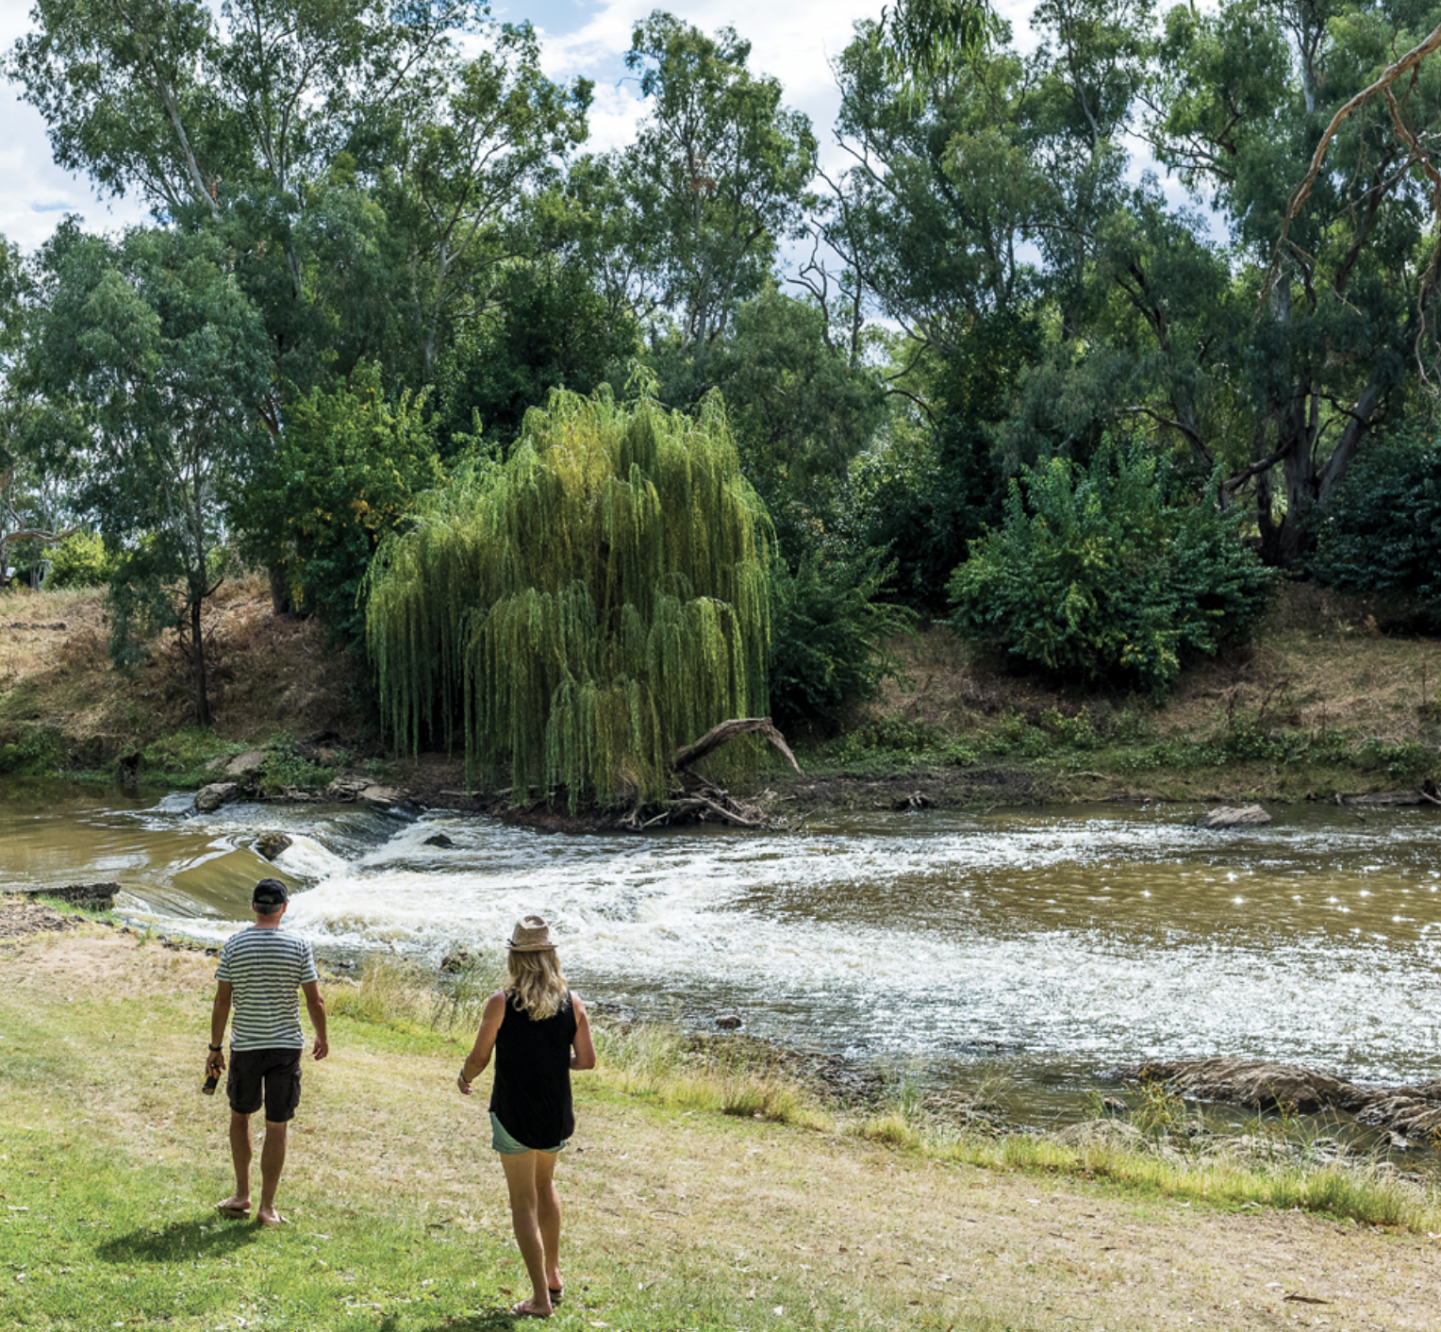 The sparkling waters of the Lachlan River in Forbes New South Wales